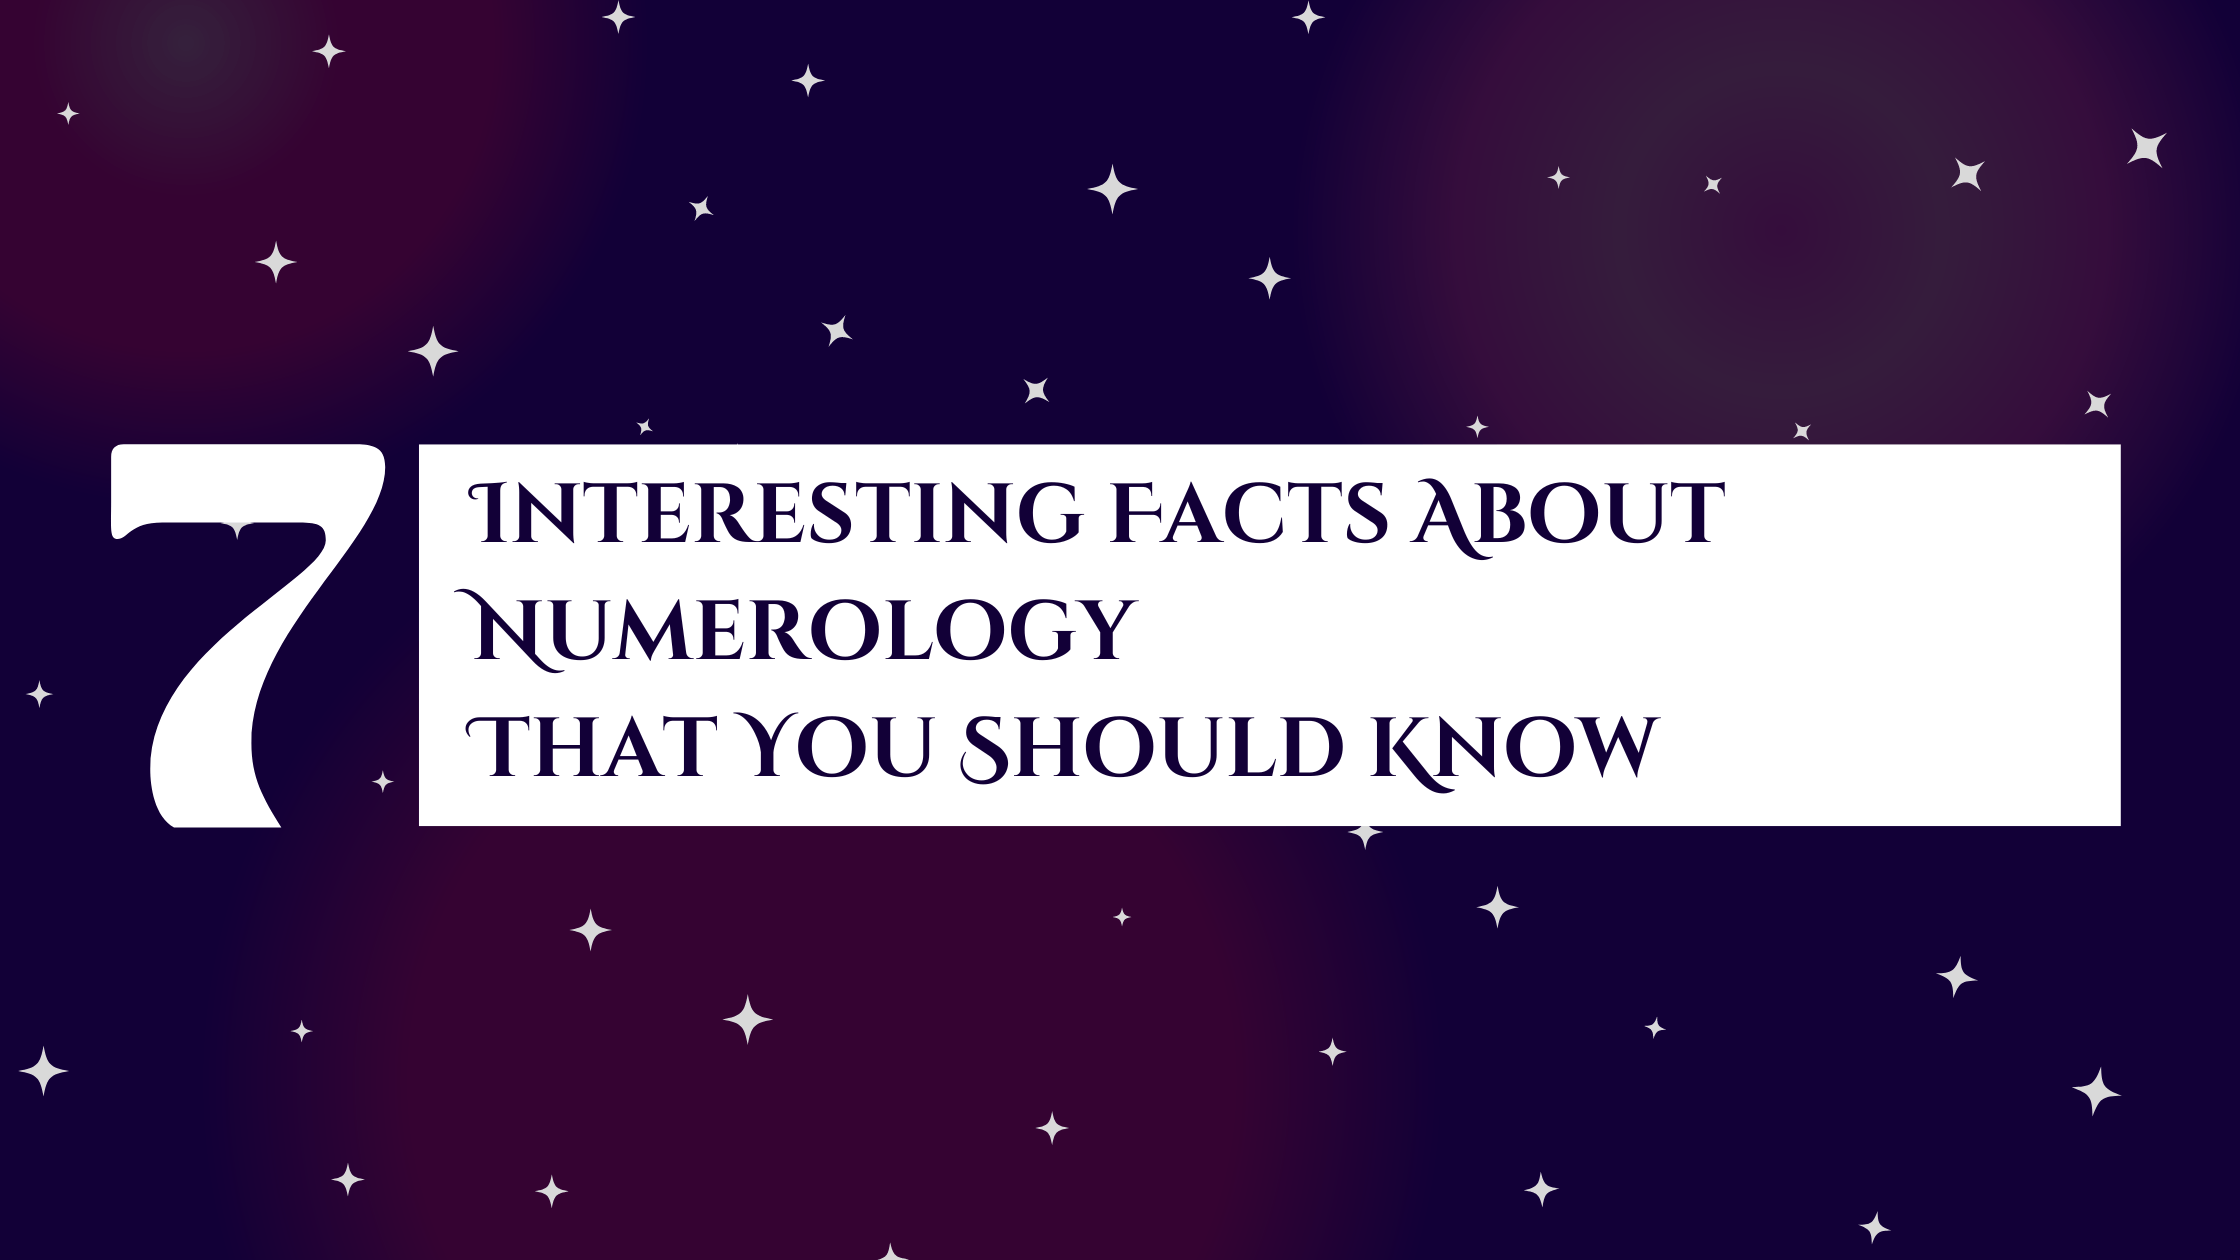 7 Interesting Facts About Numerology That You Should Know